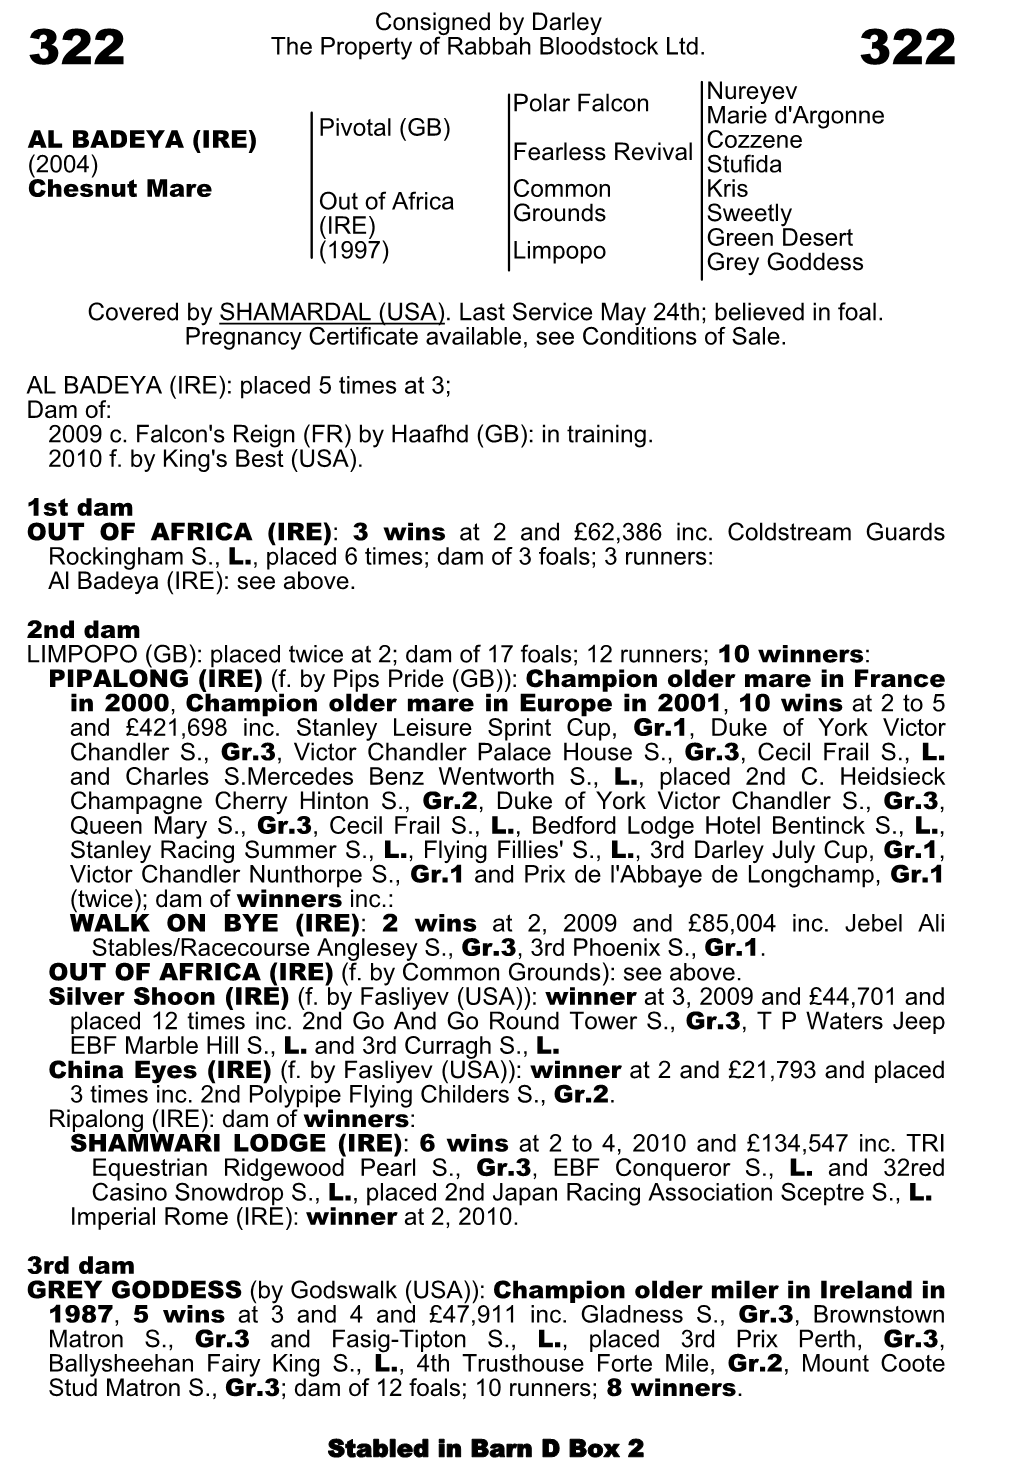 Consigned by Darley the Property of Rabbah Bloodstock Ltd. Polar